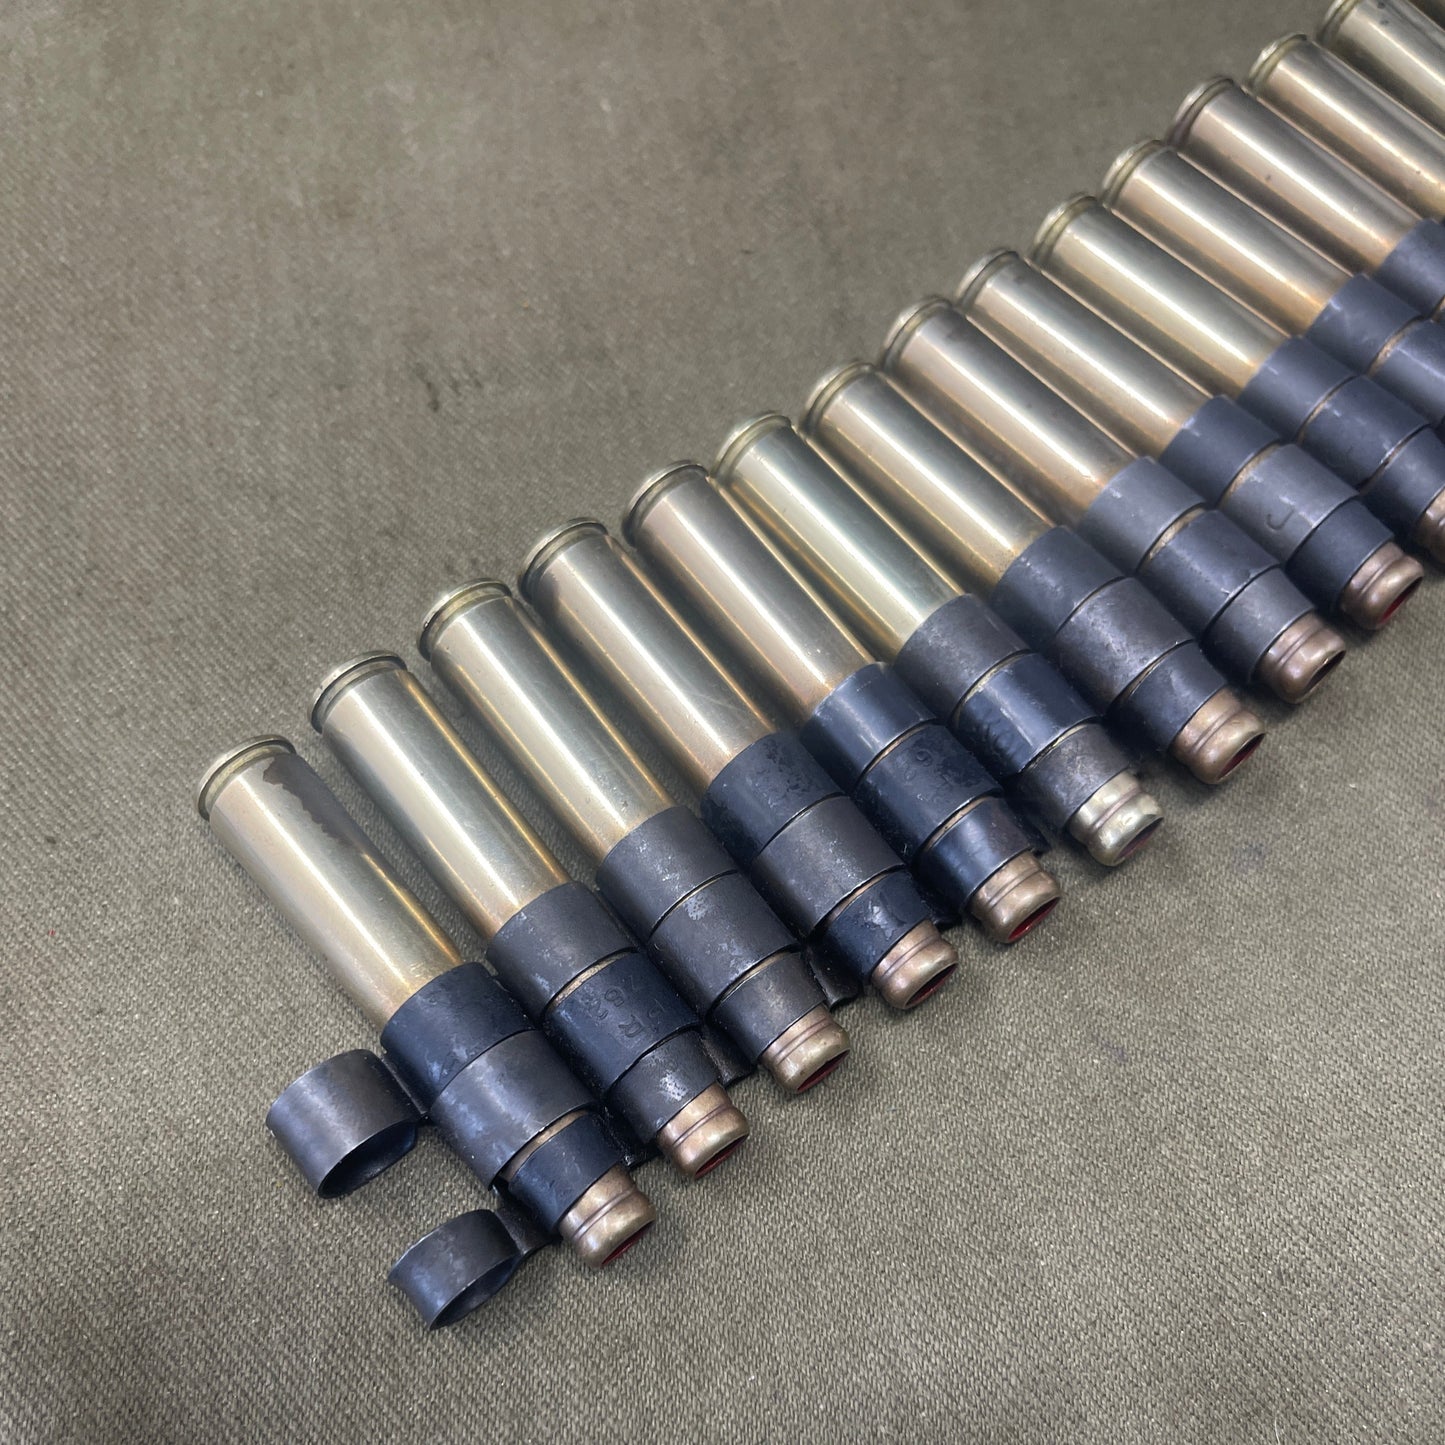 18 x 30-06 Blank Rounds in Stripper Clips